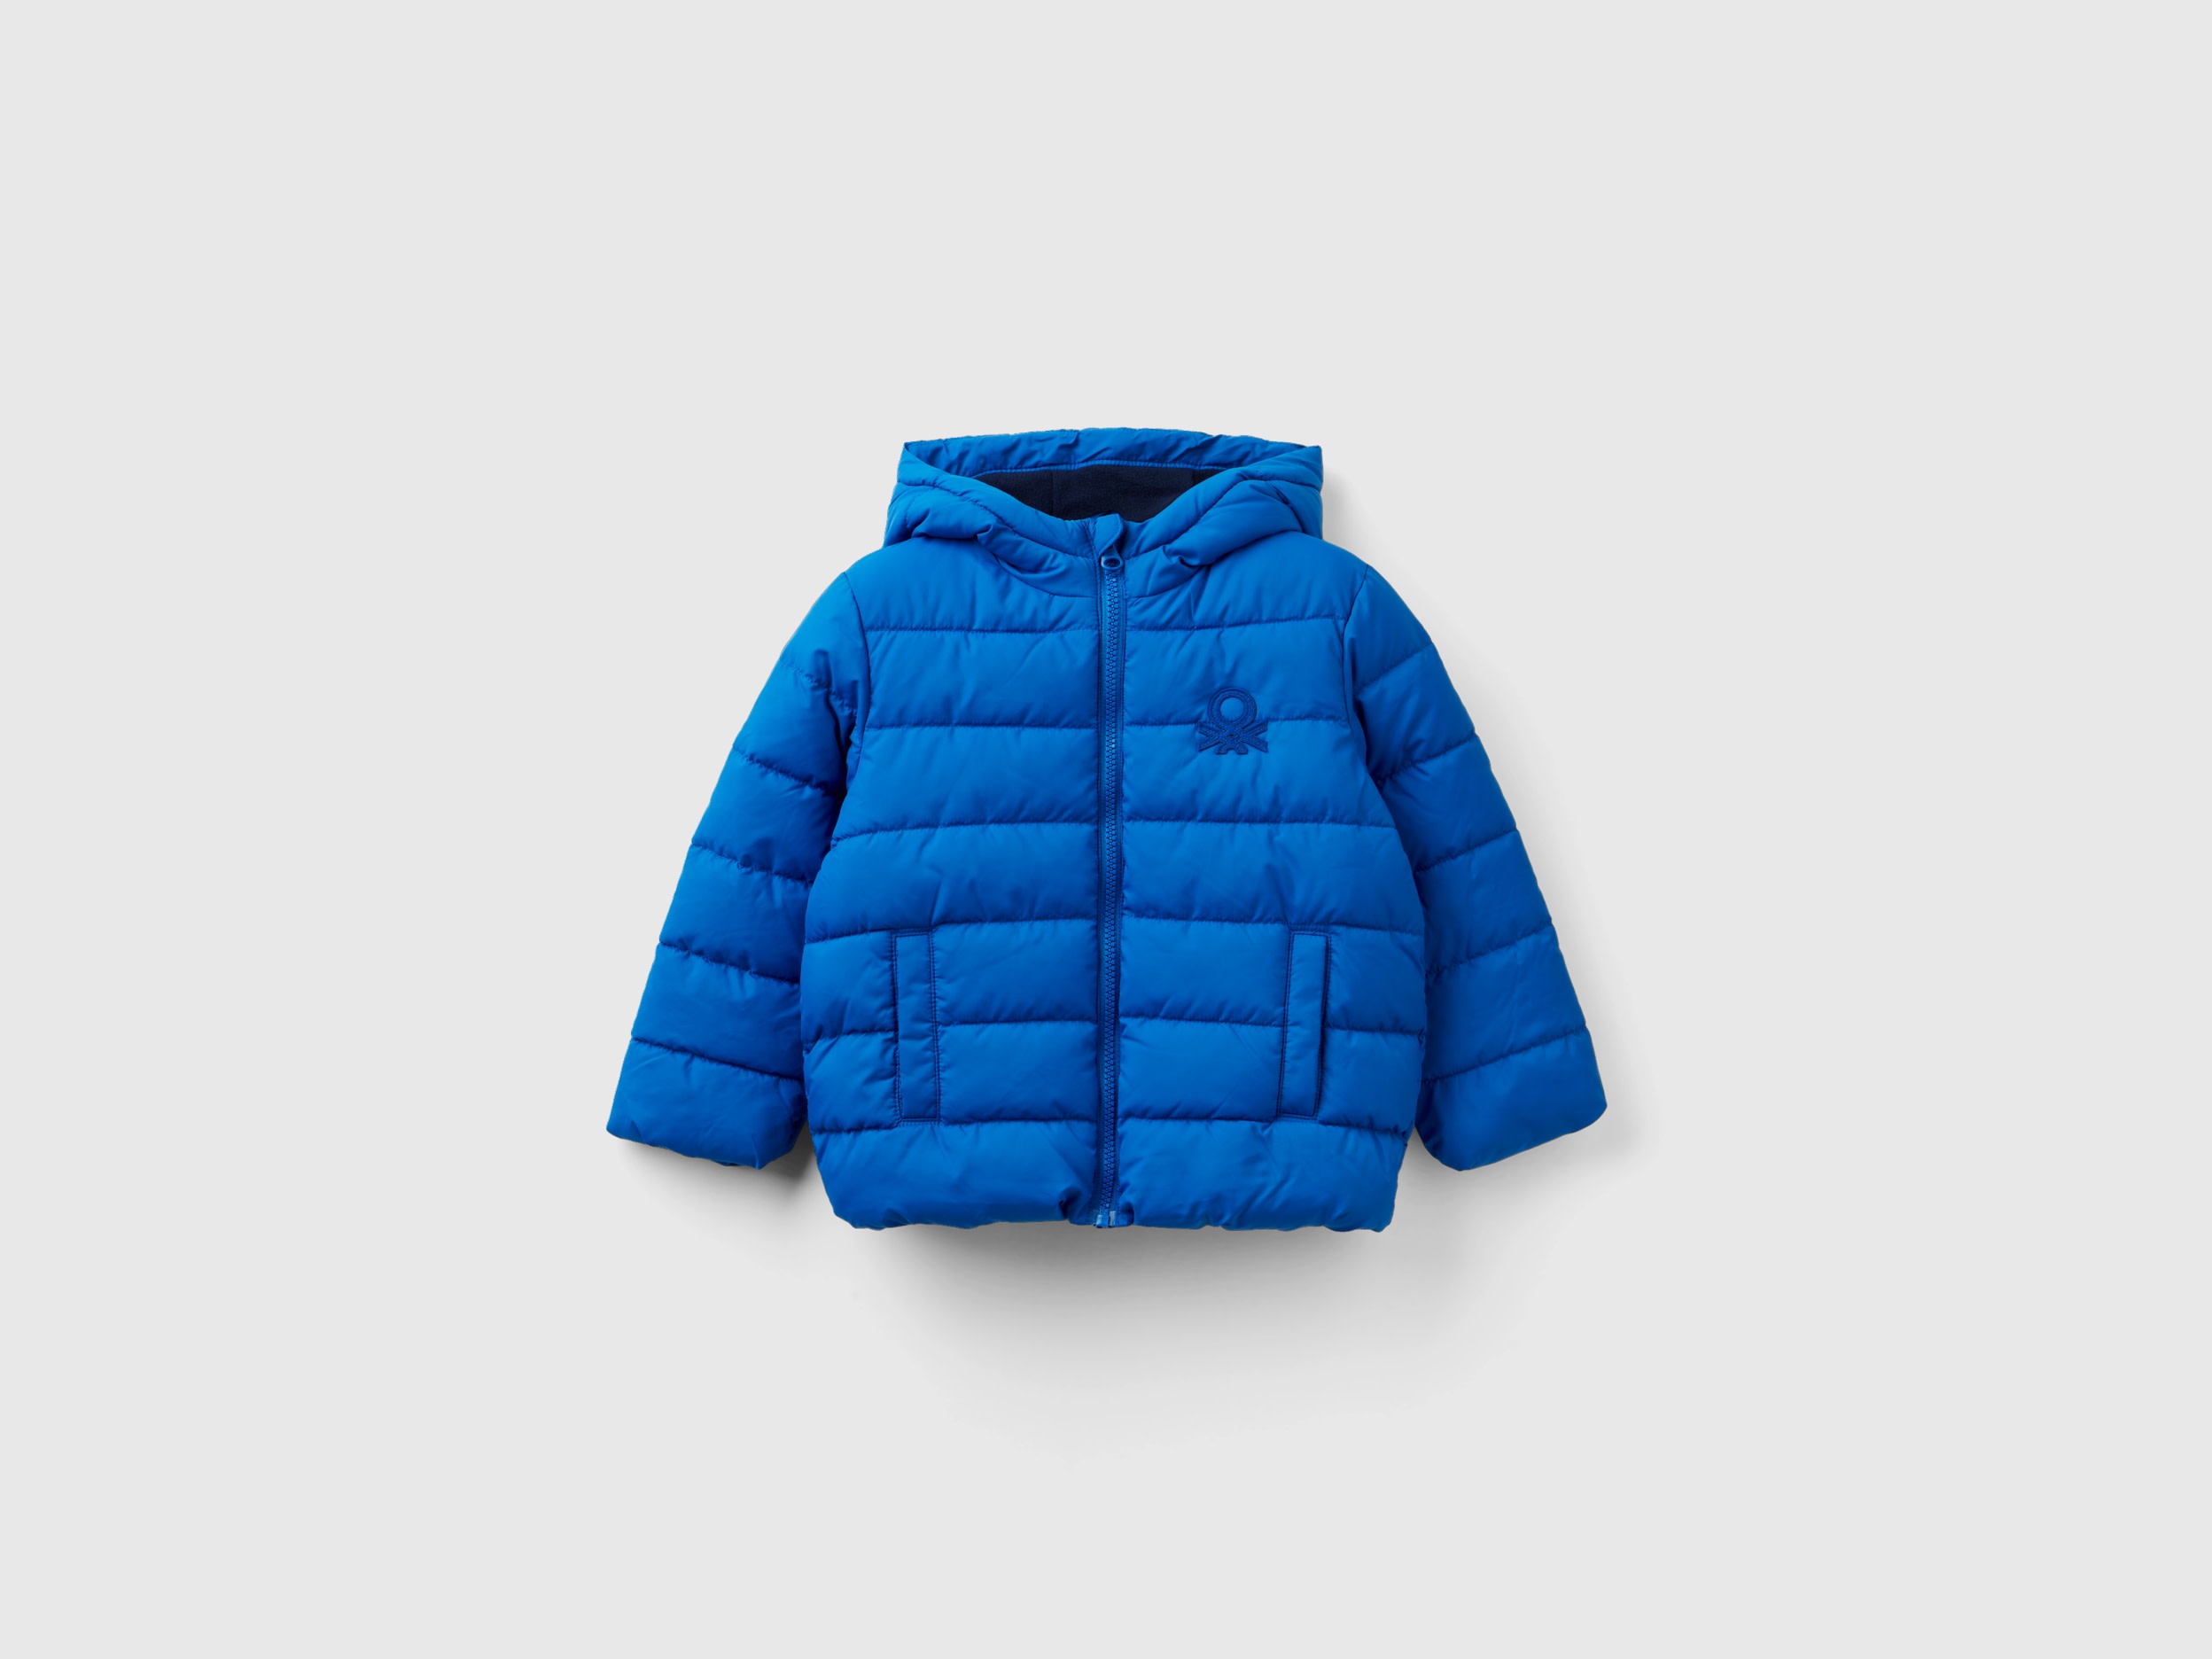 Benetton, Puffer Jacket With Hood And Logo, size 5-6, Bright Blue, Kids